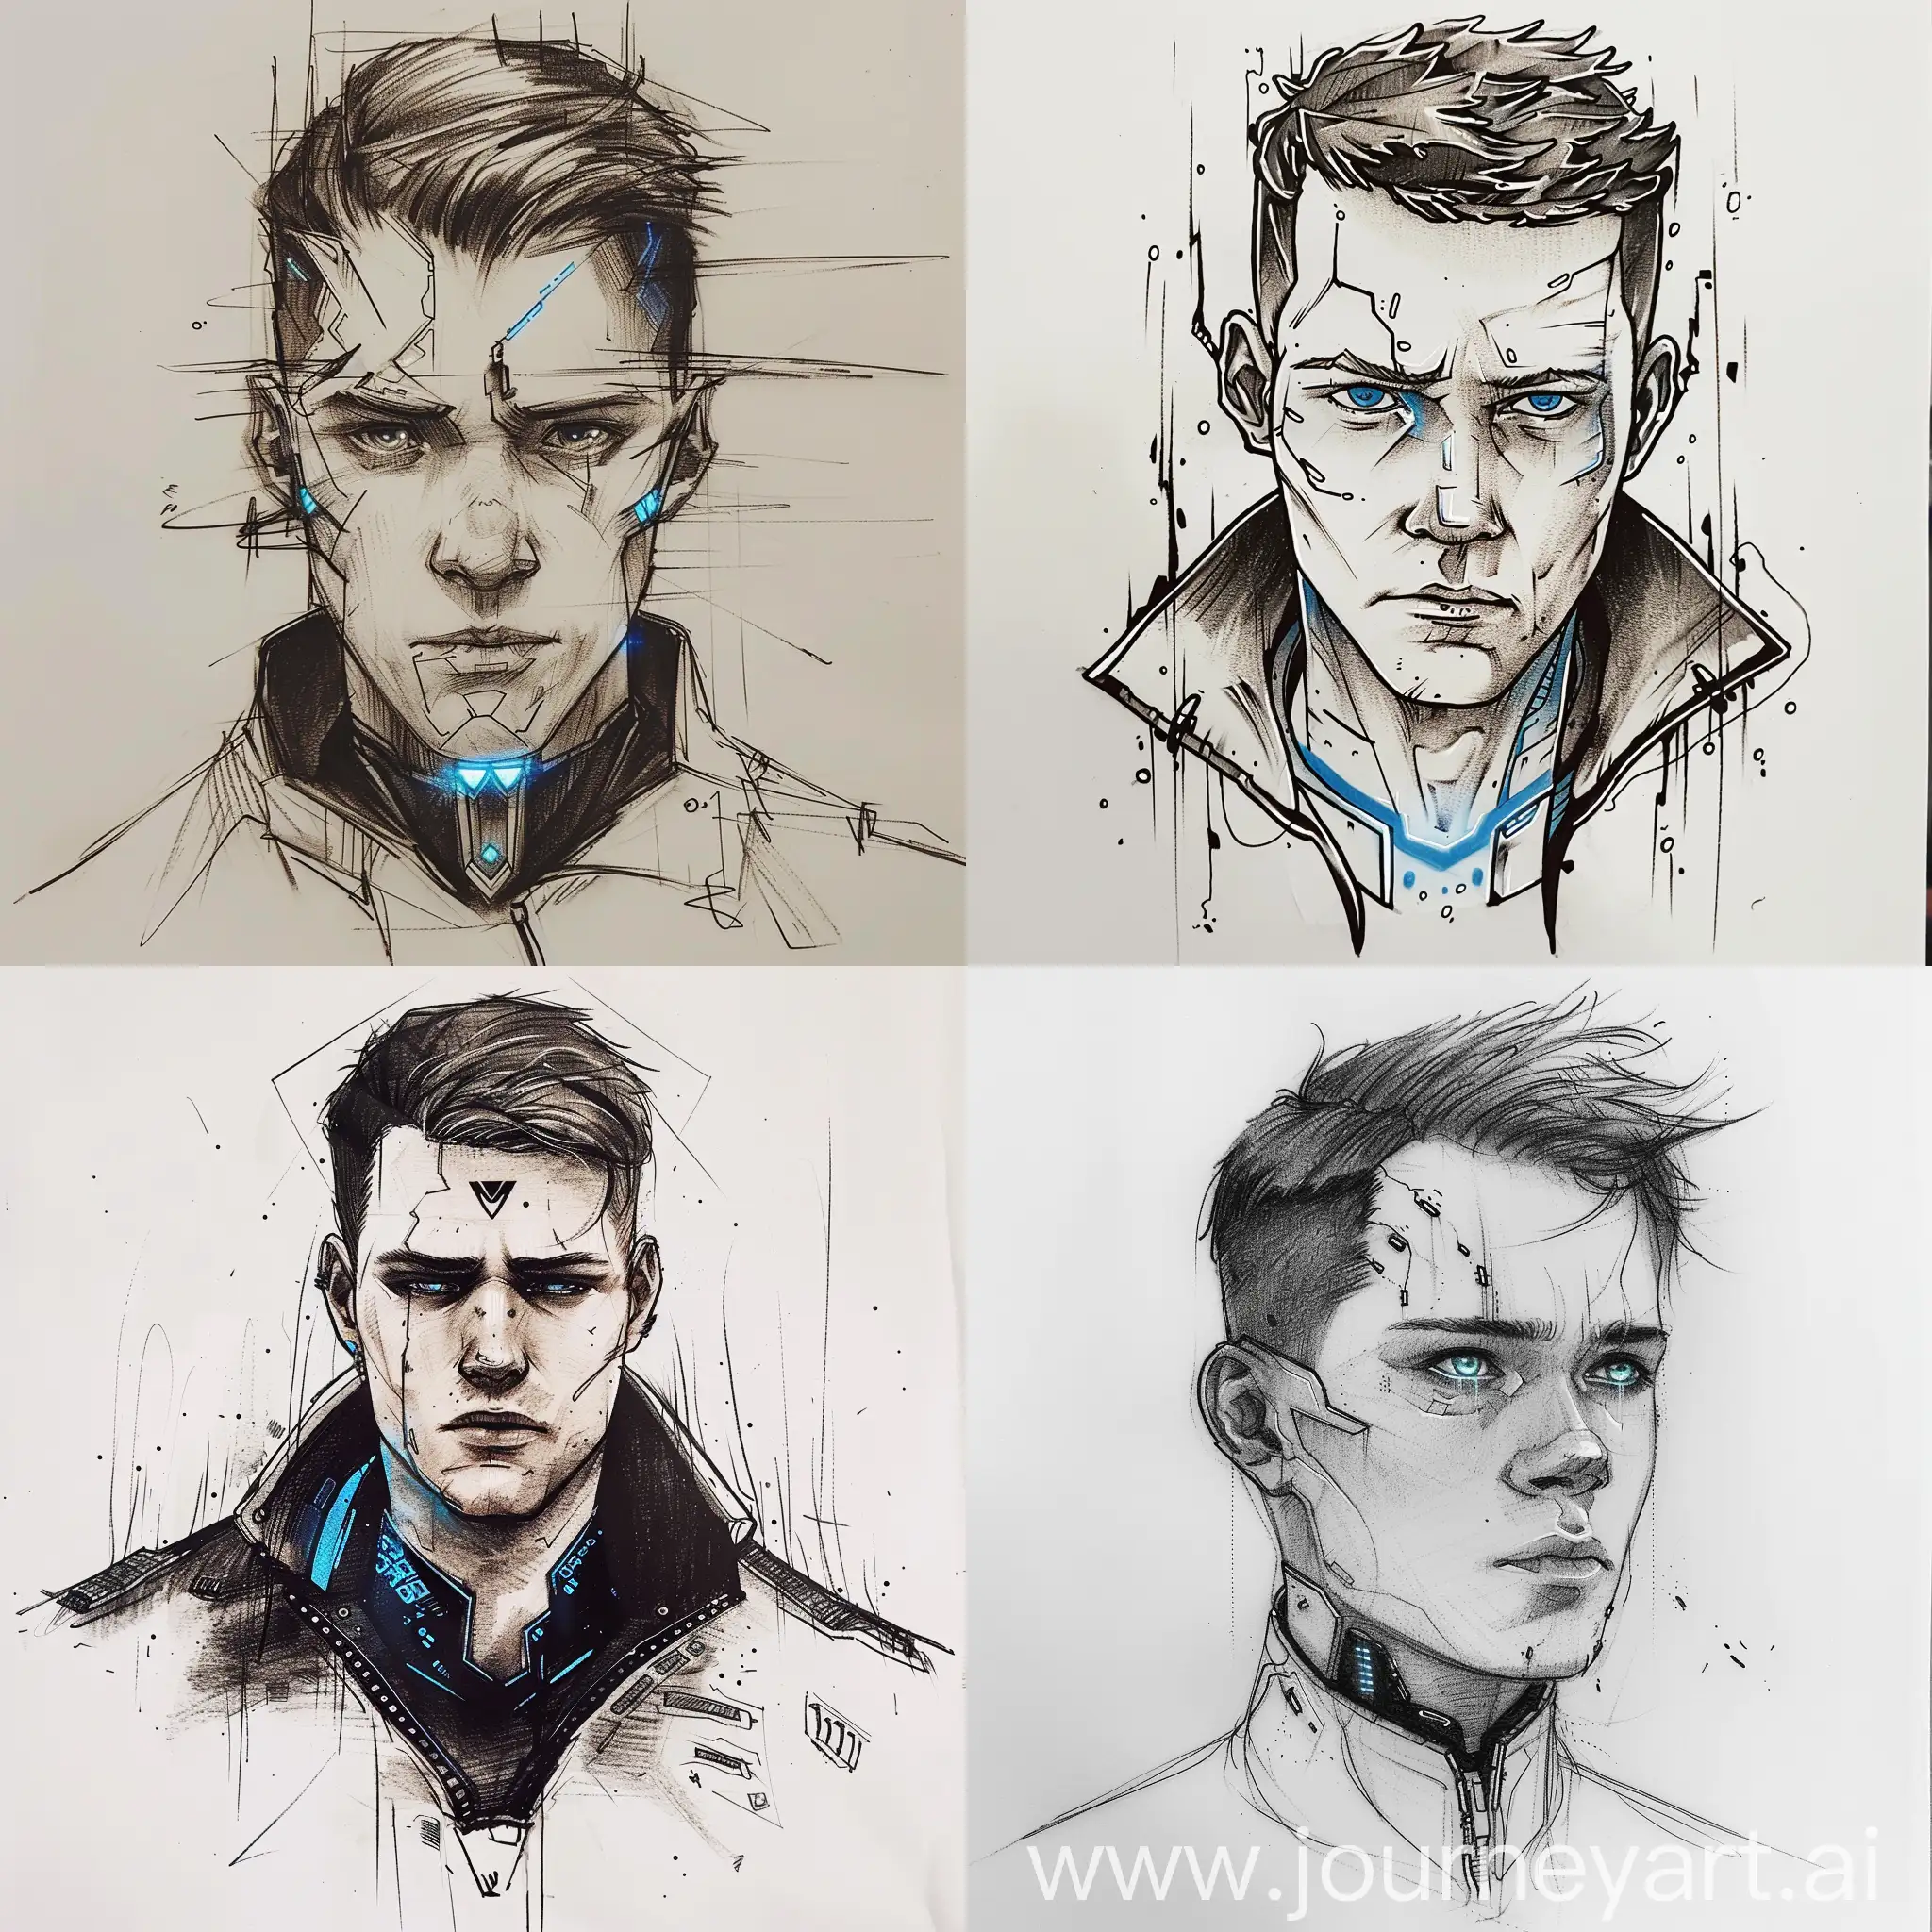 connor from detroit become human, tattoo design sketch, white background